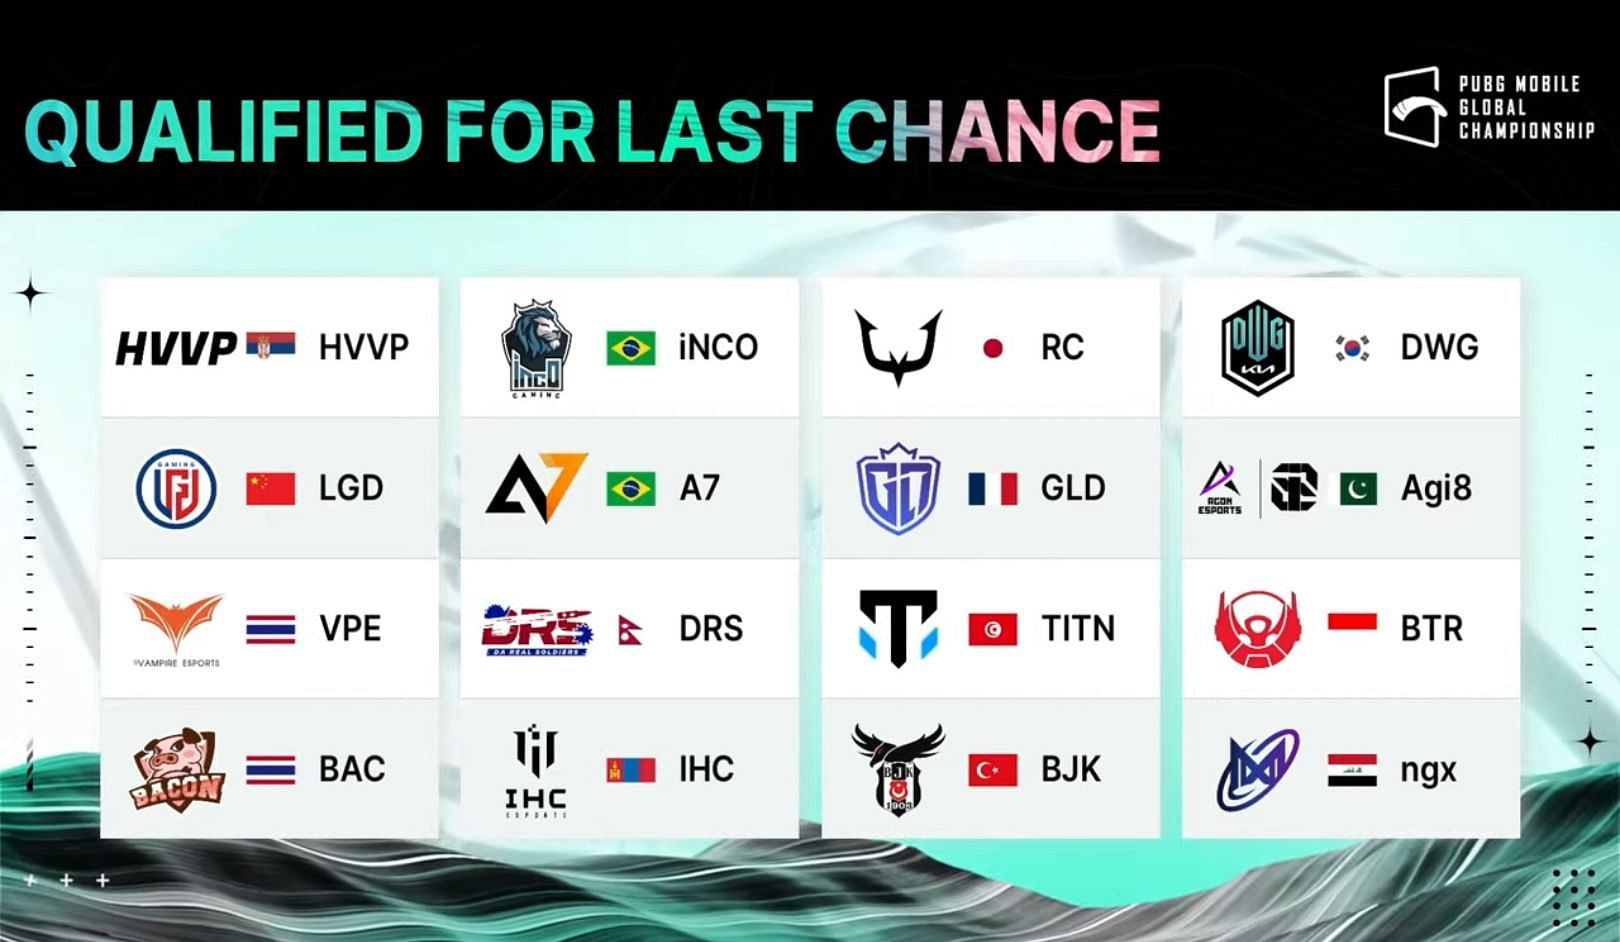 Qualified teams for PMGC 2022 Last Chance Stage (Image via PUBG Mobile)